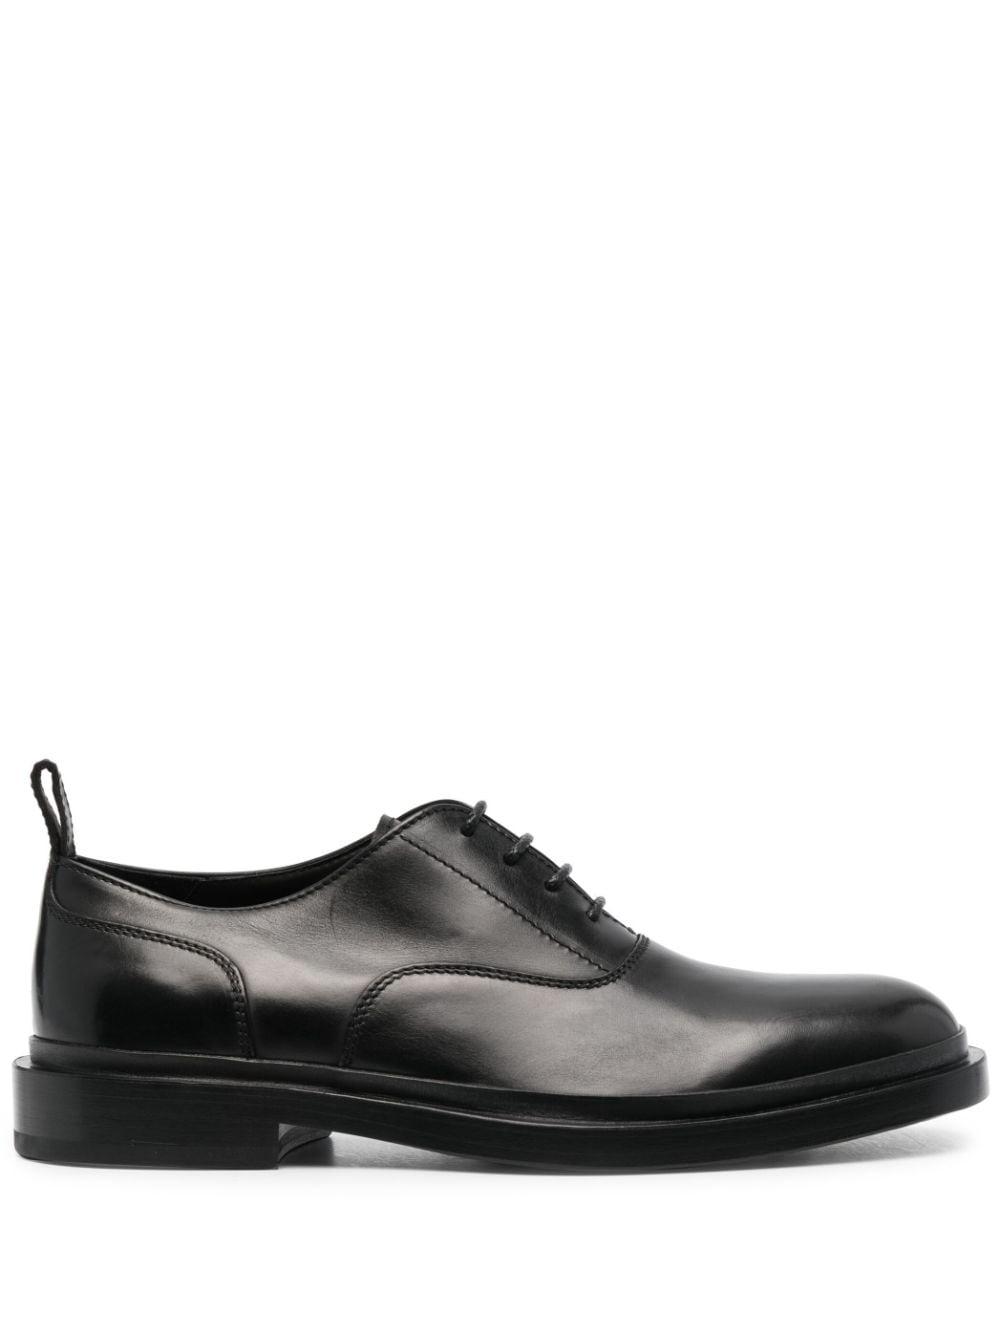 Officine Creative Concrete 002 Leather Derby Shoes in Black for Men | Lyst